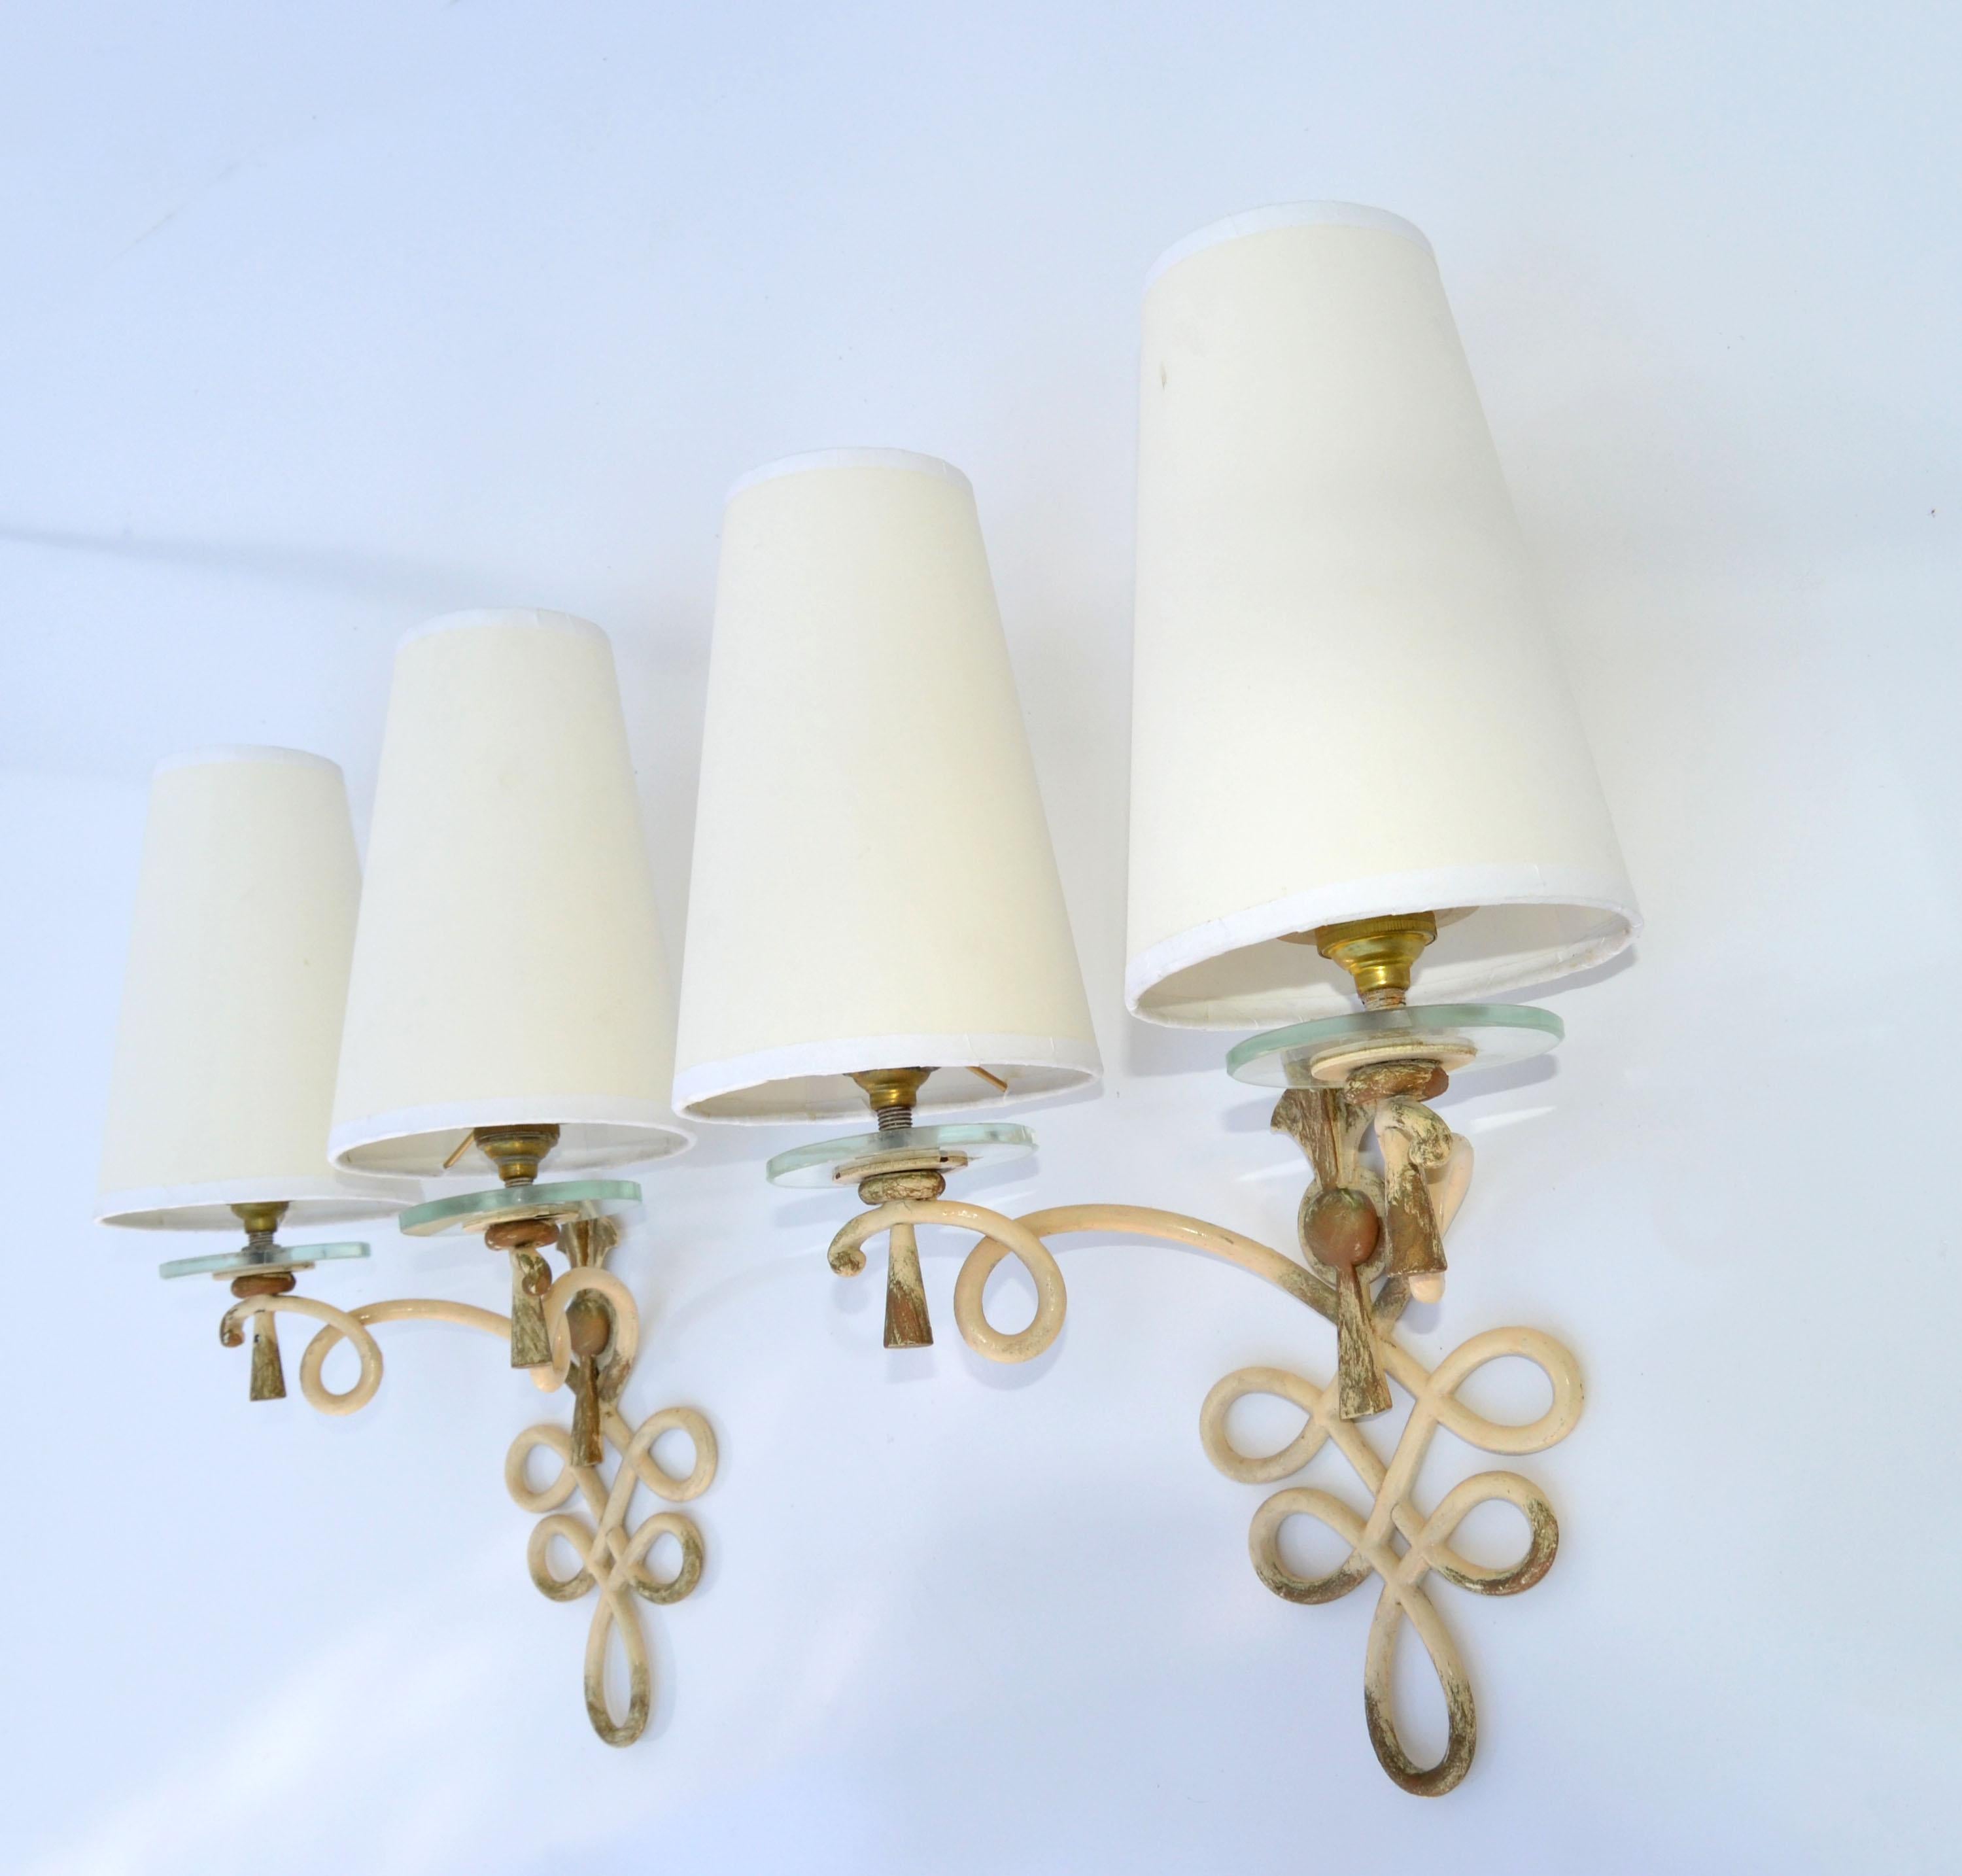 French Wrought Iron & Round Glass Sconces Cone Shades, Wall Lights Art Deco 1940 In Good Condition For Sale In Miami, FL